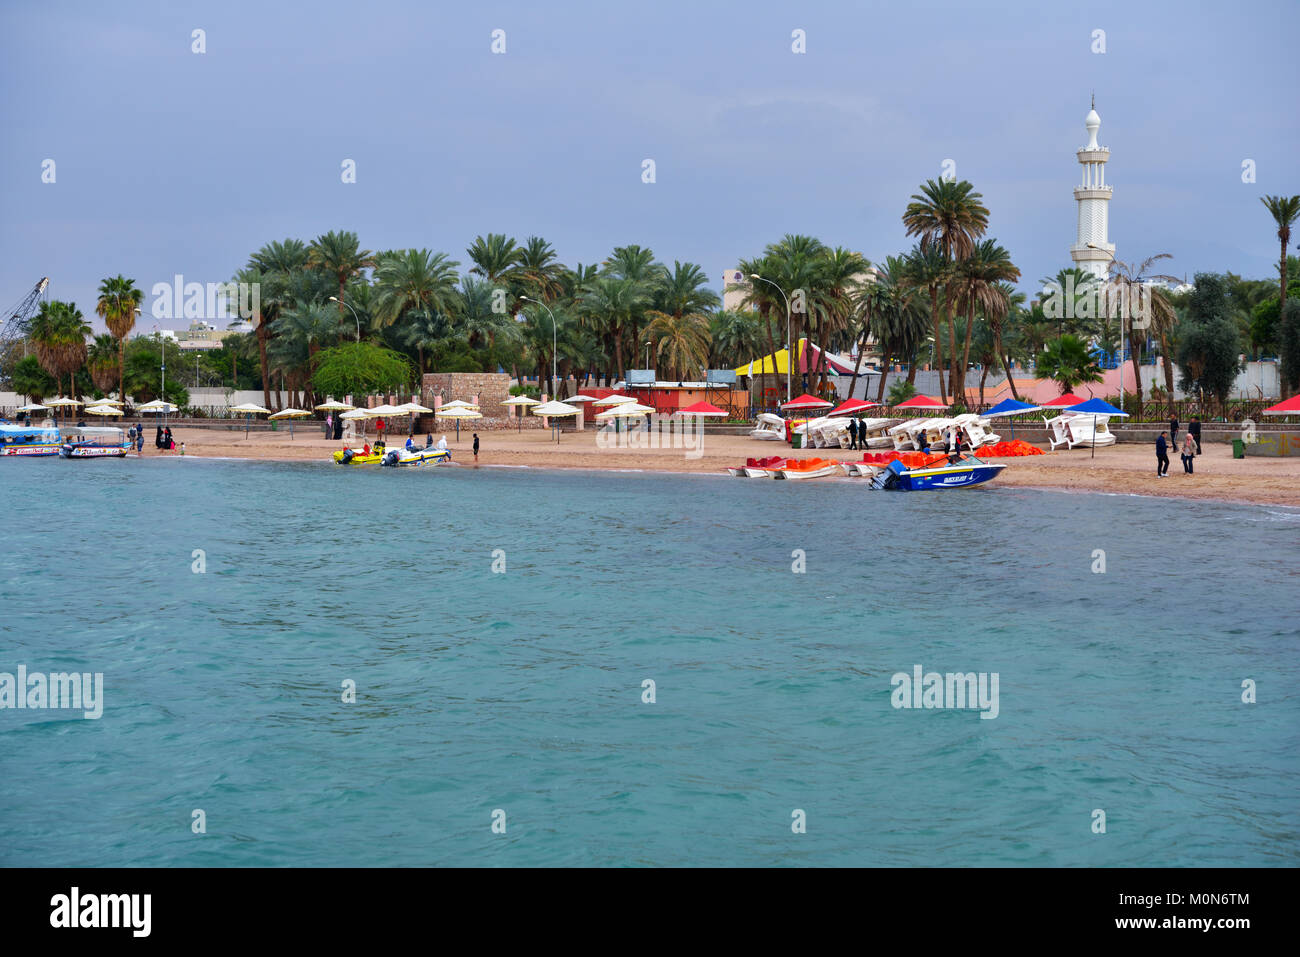 Aqaba, Jordan - March 14, 2014: Boats on the beach of Aqaba in springtime. Glass bottom boats allow tourists to see corals and fishes Stock Photo